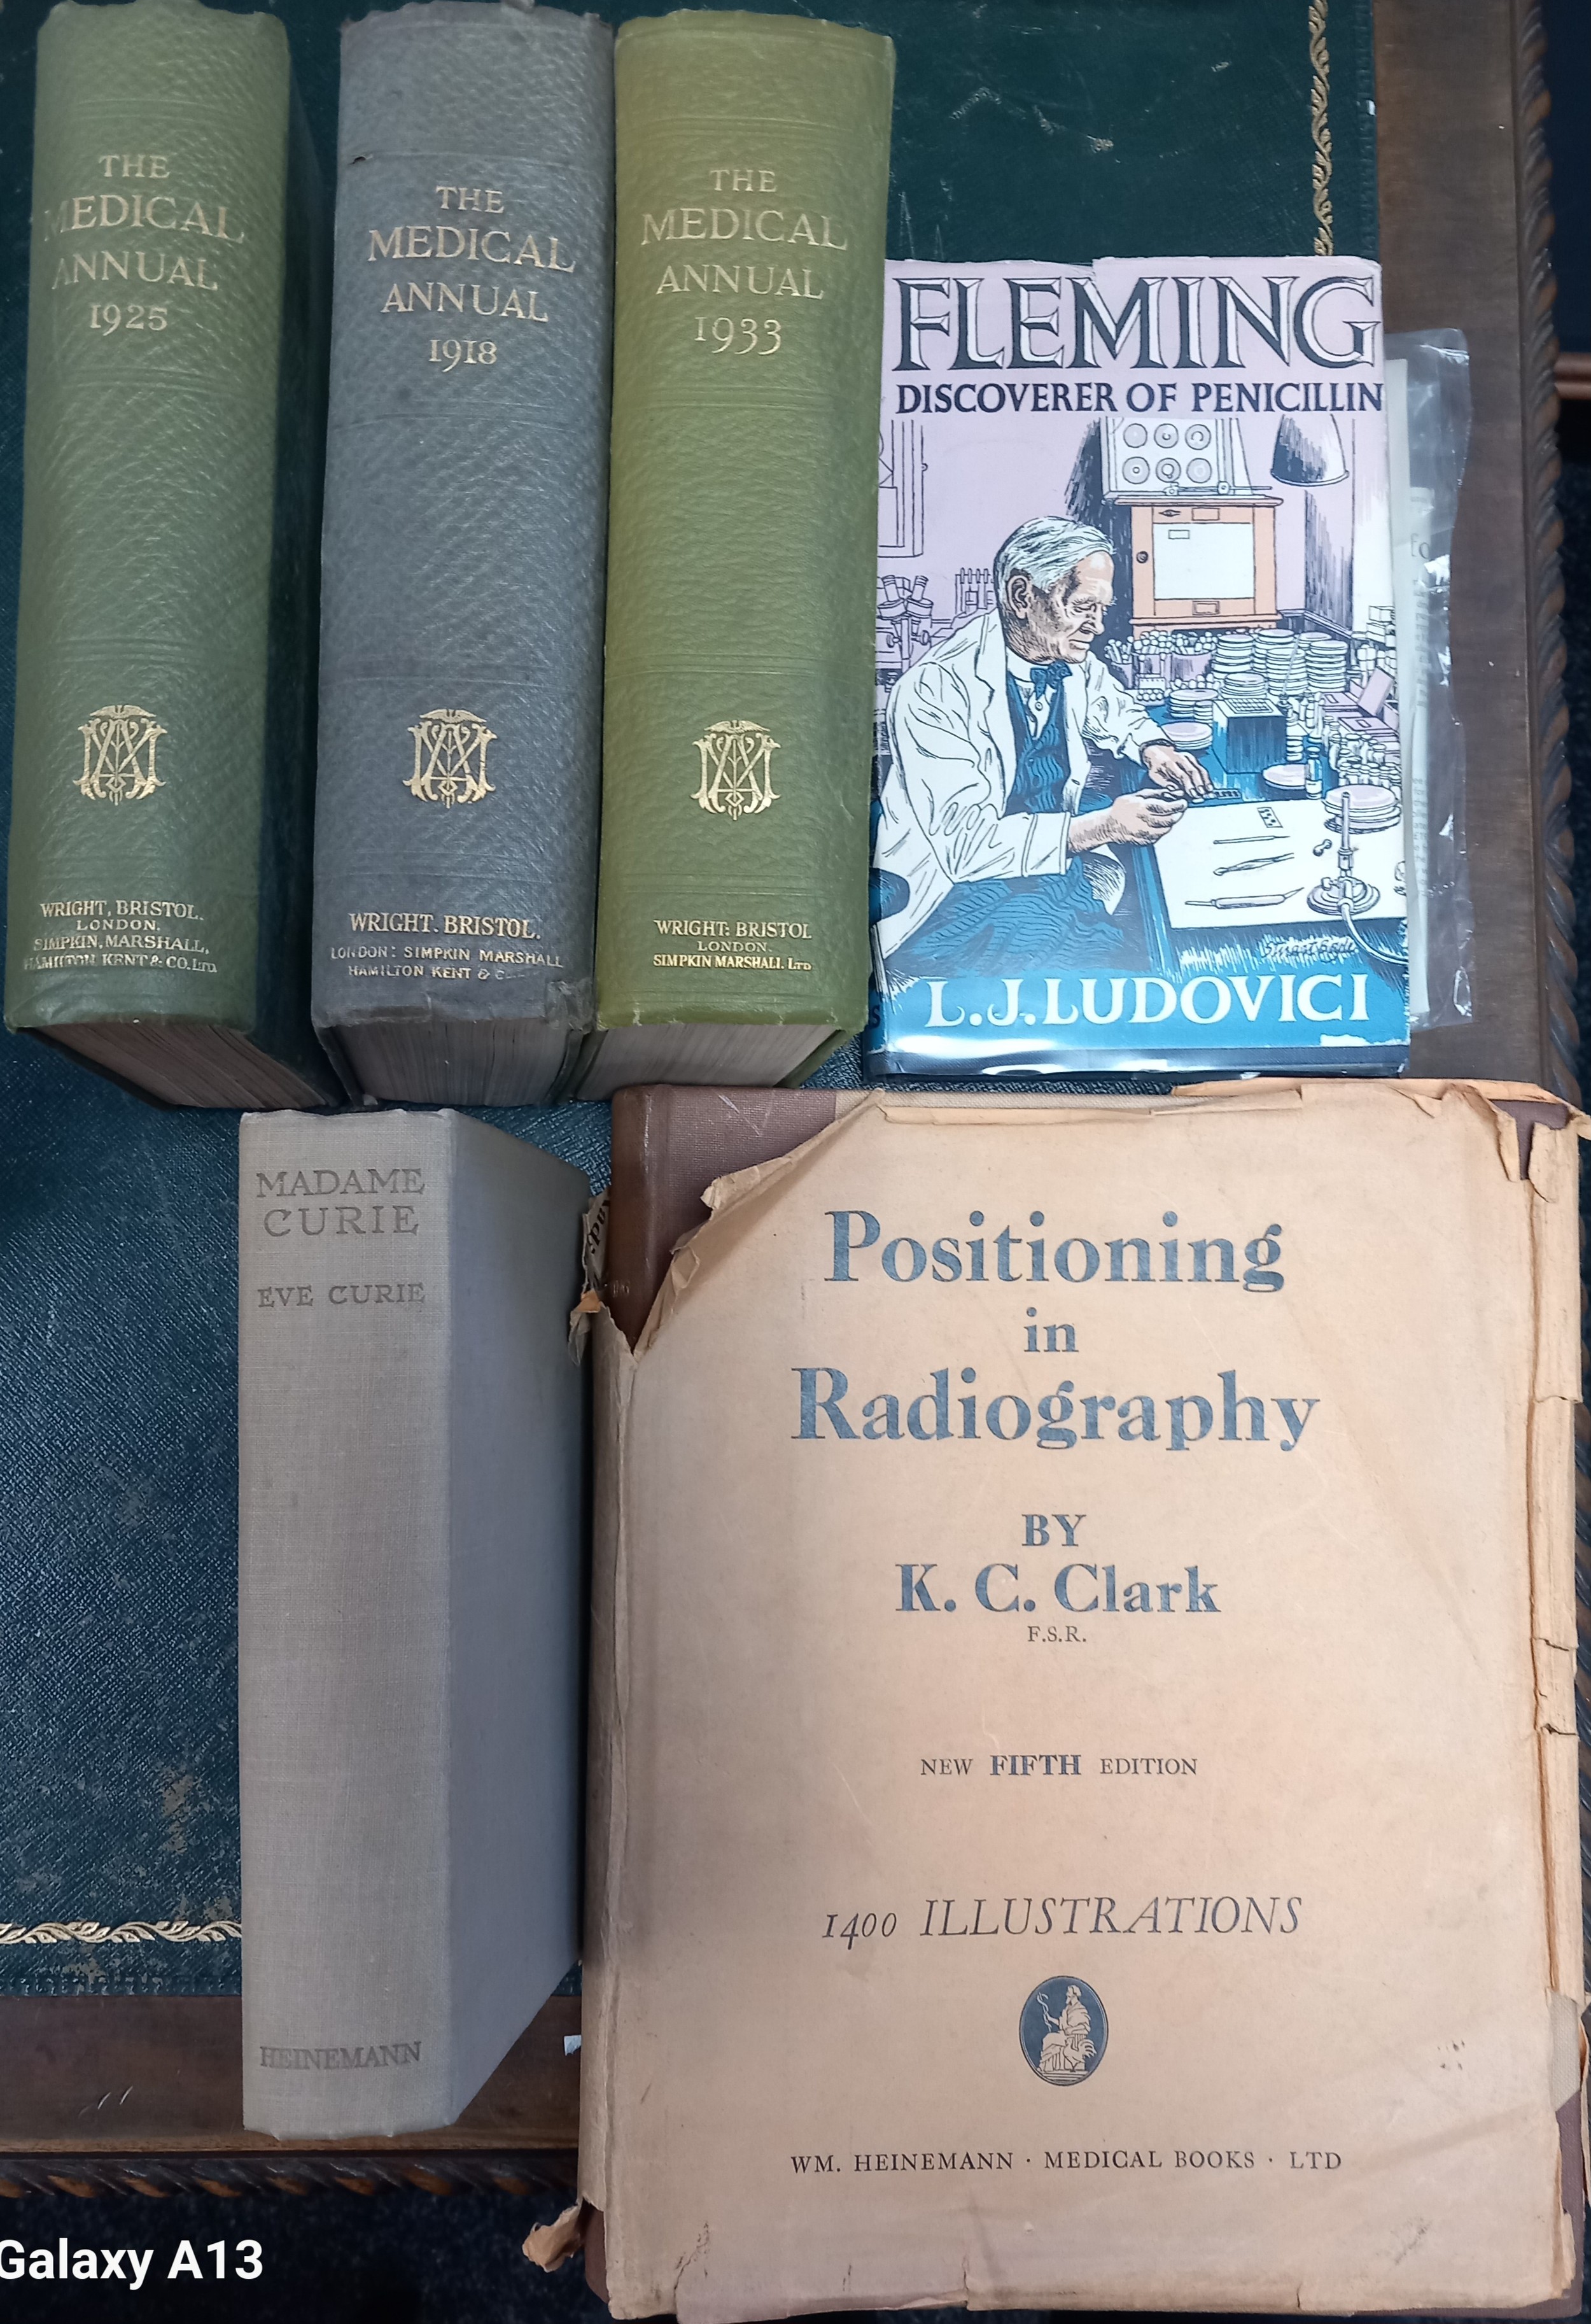 Several Medical Publications to Include Madame Curie By Eve Curie 1941. Set Of Three (The Medical